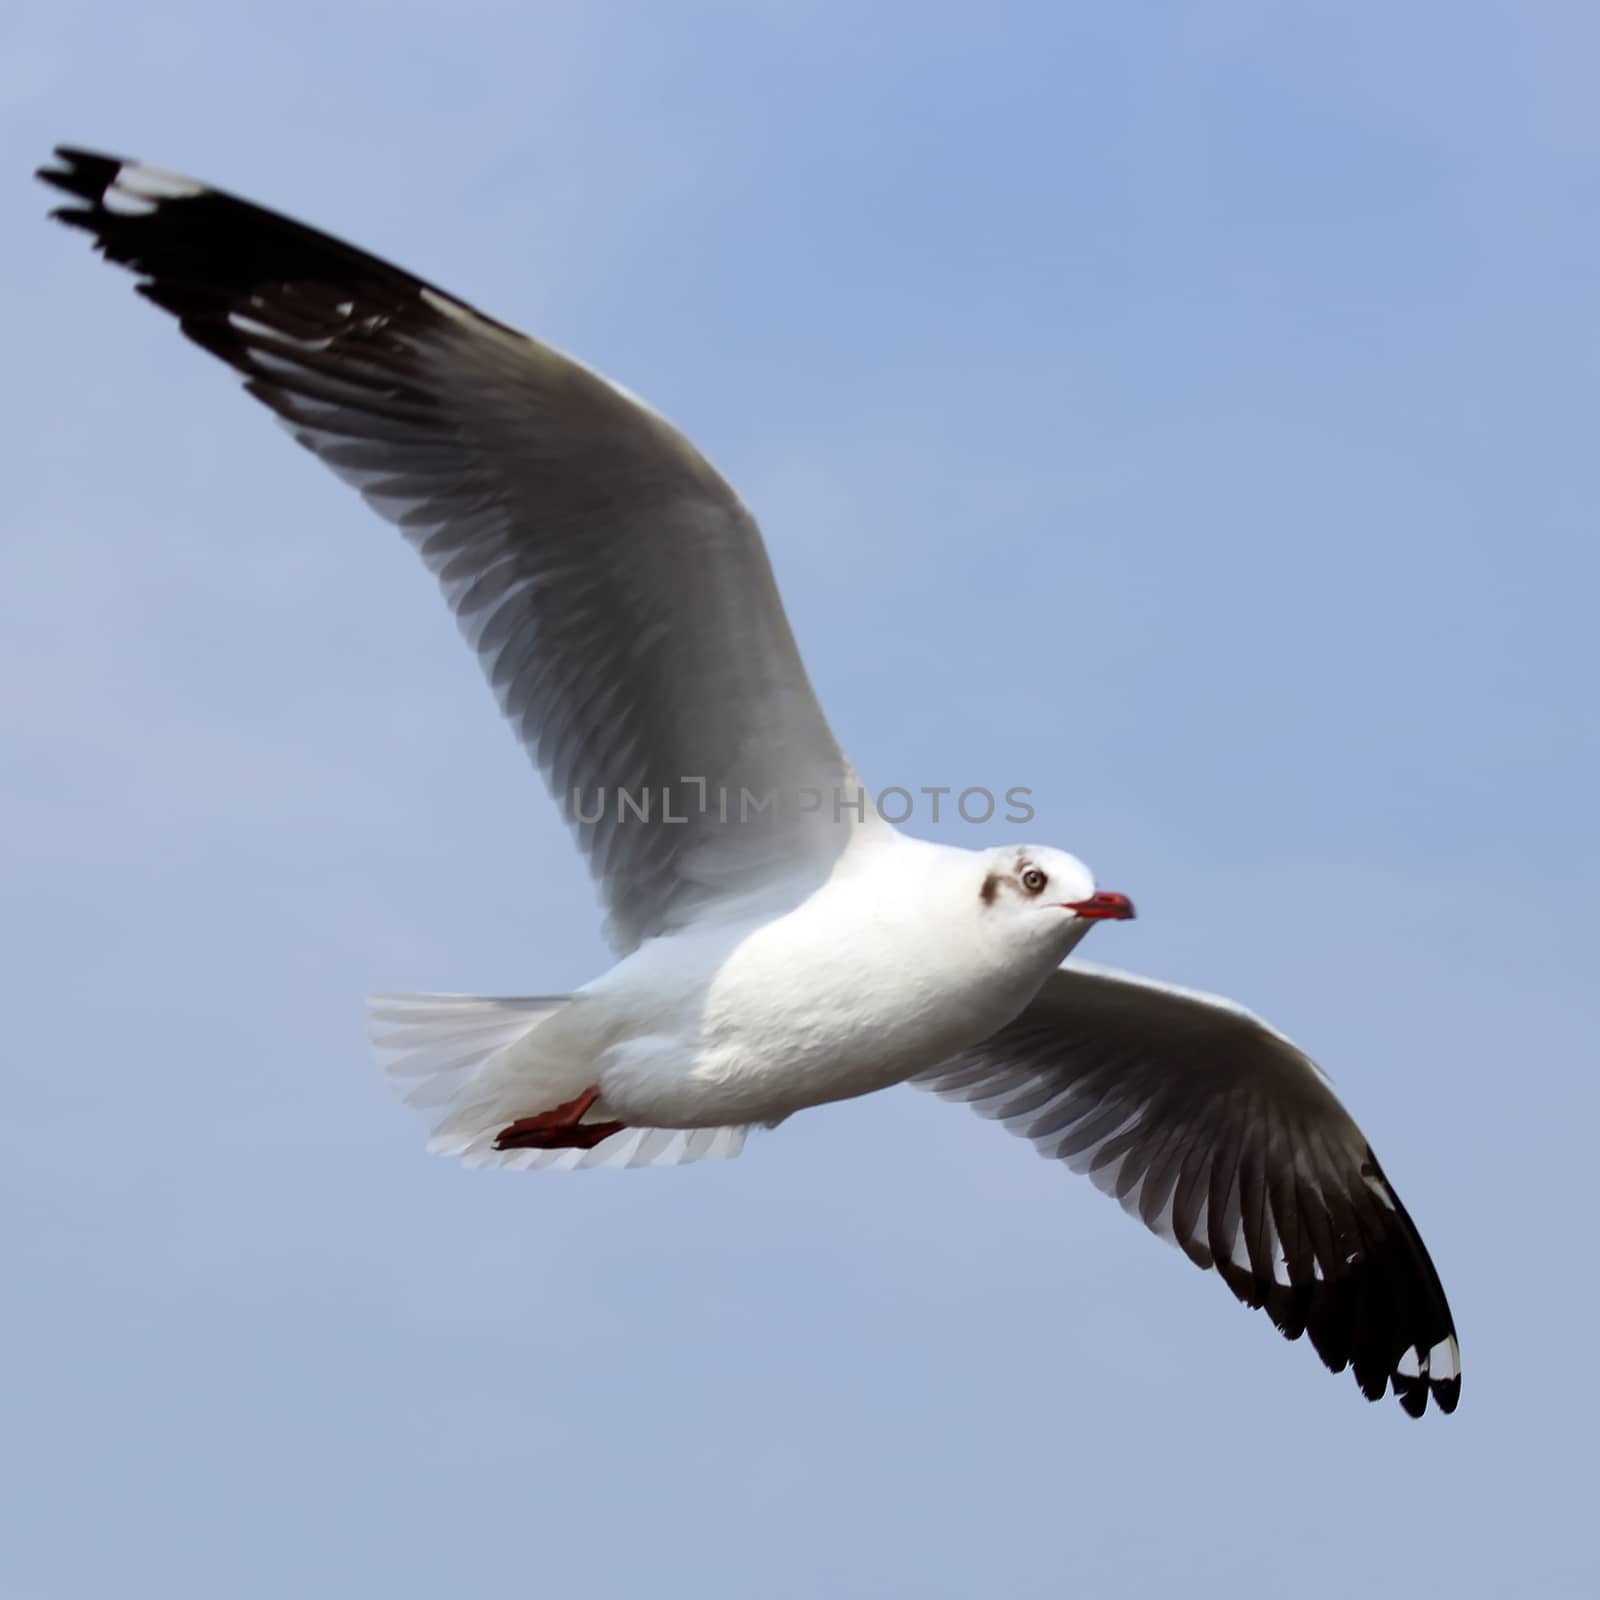 Seagull by leisuretime70